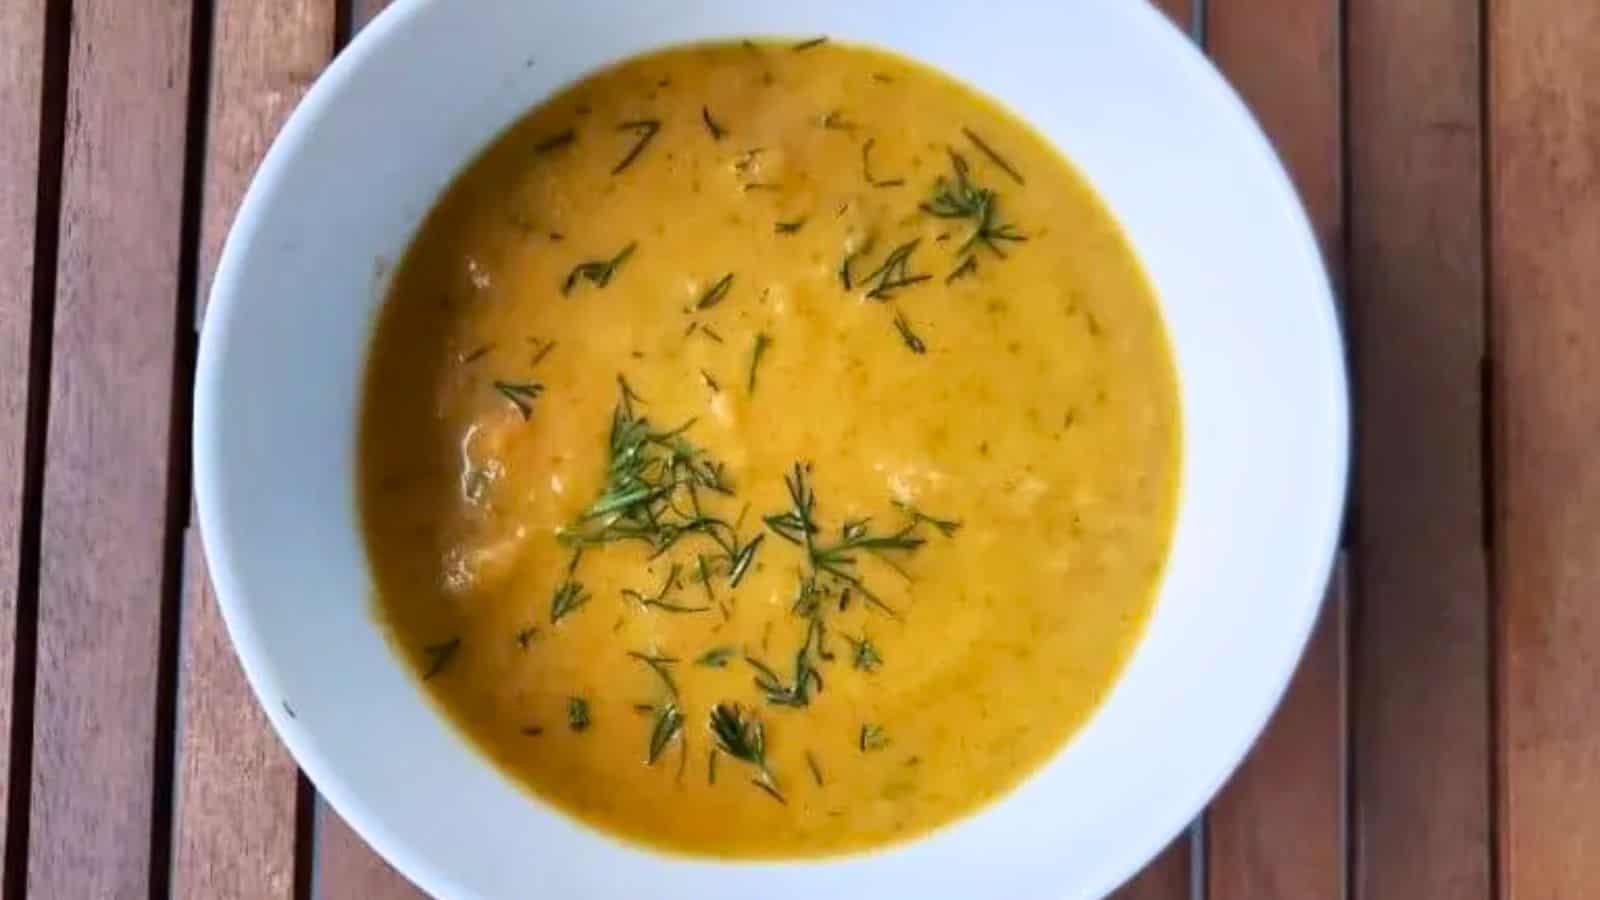 Image shows A bowl of carrot ginger soup sprigs of dill.